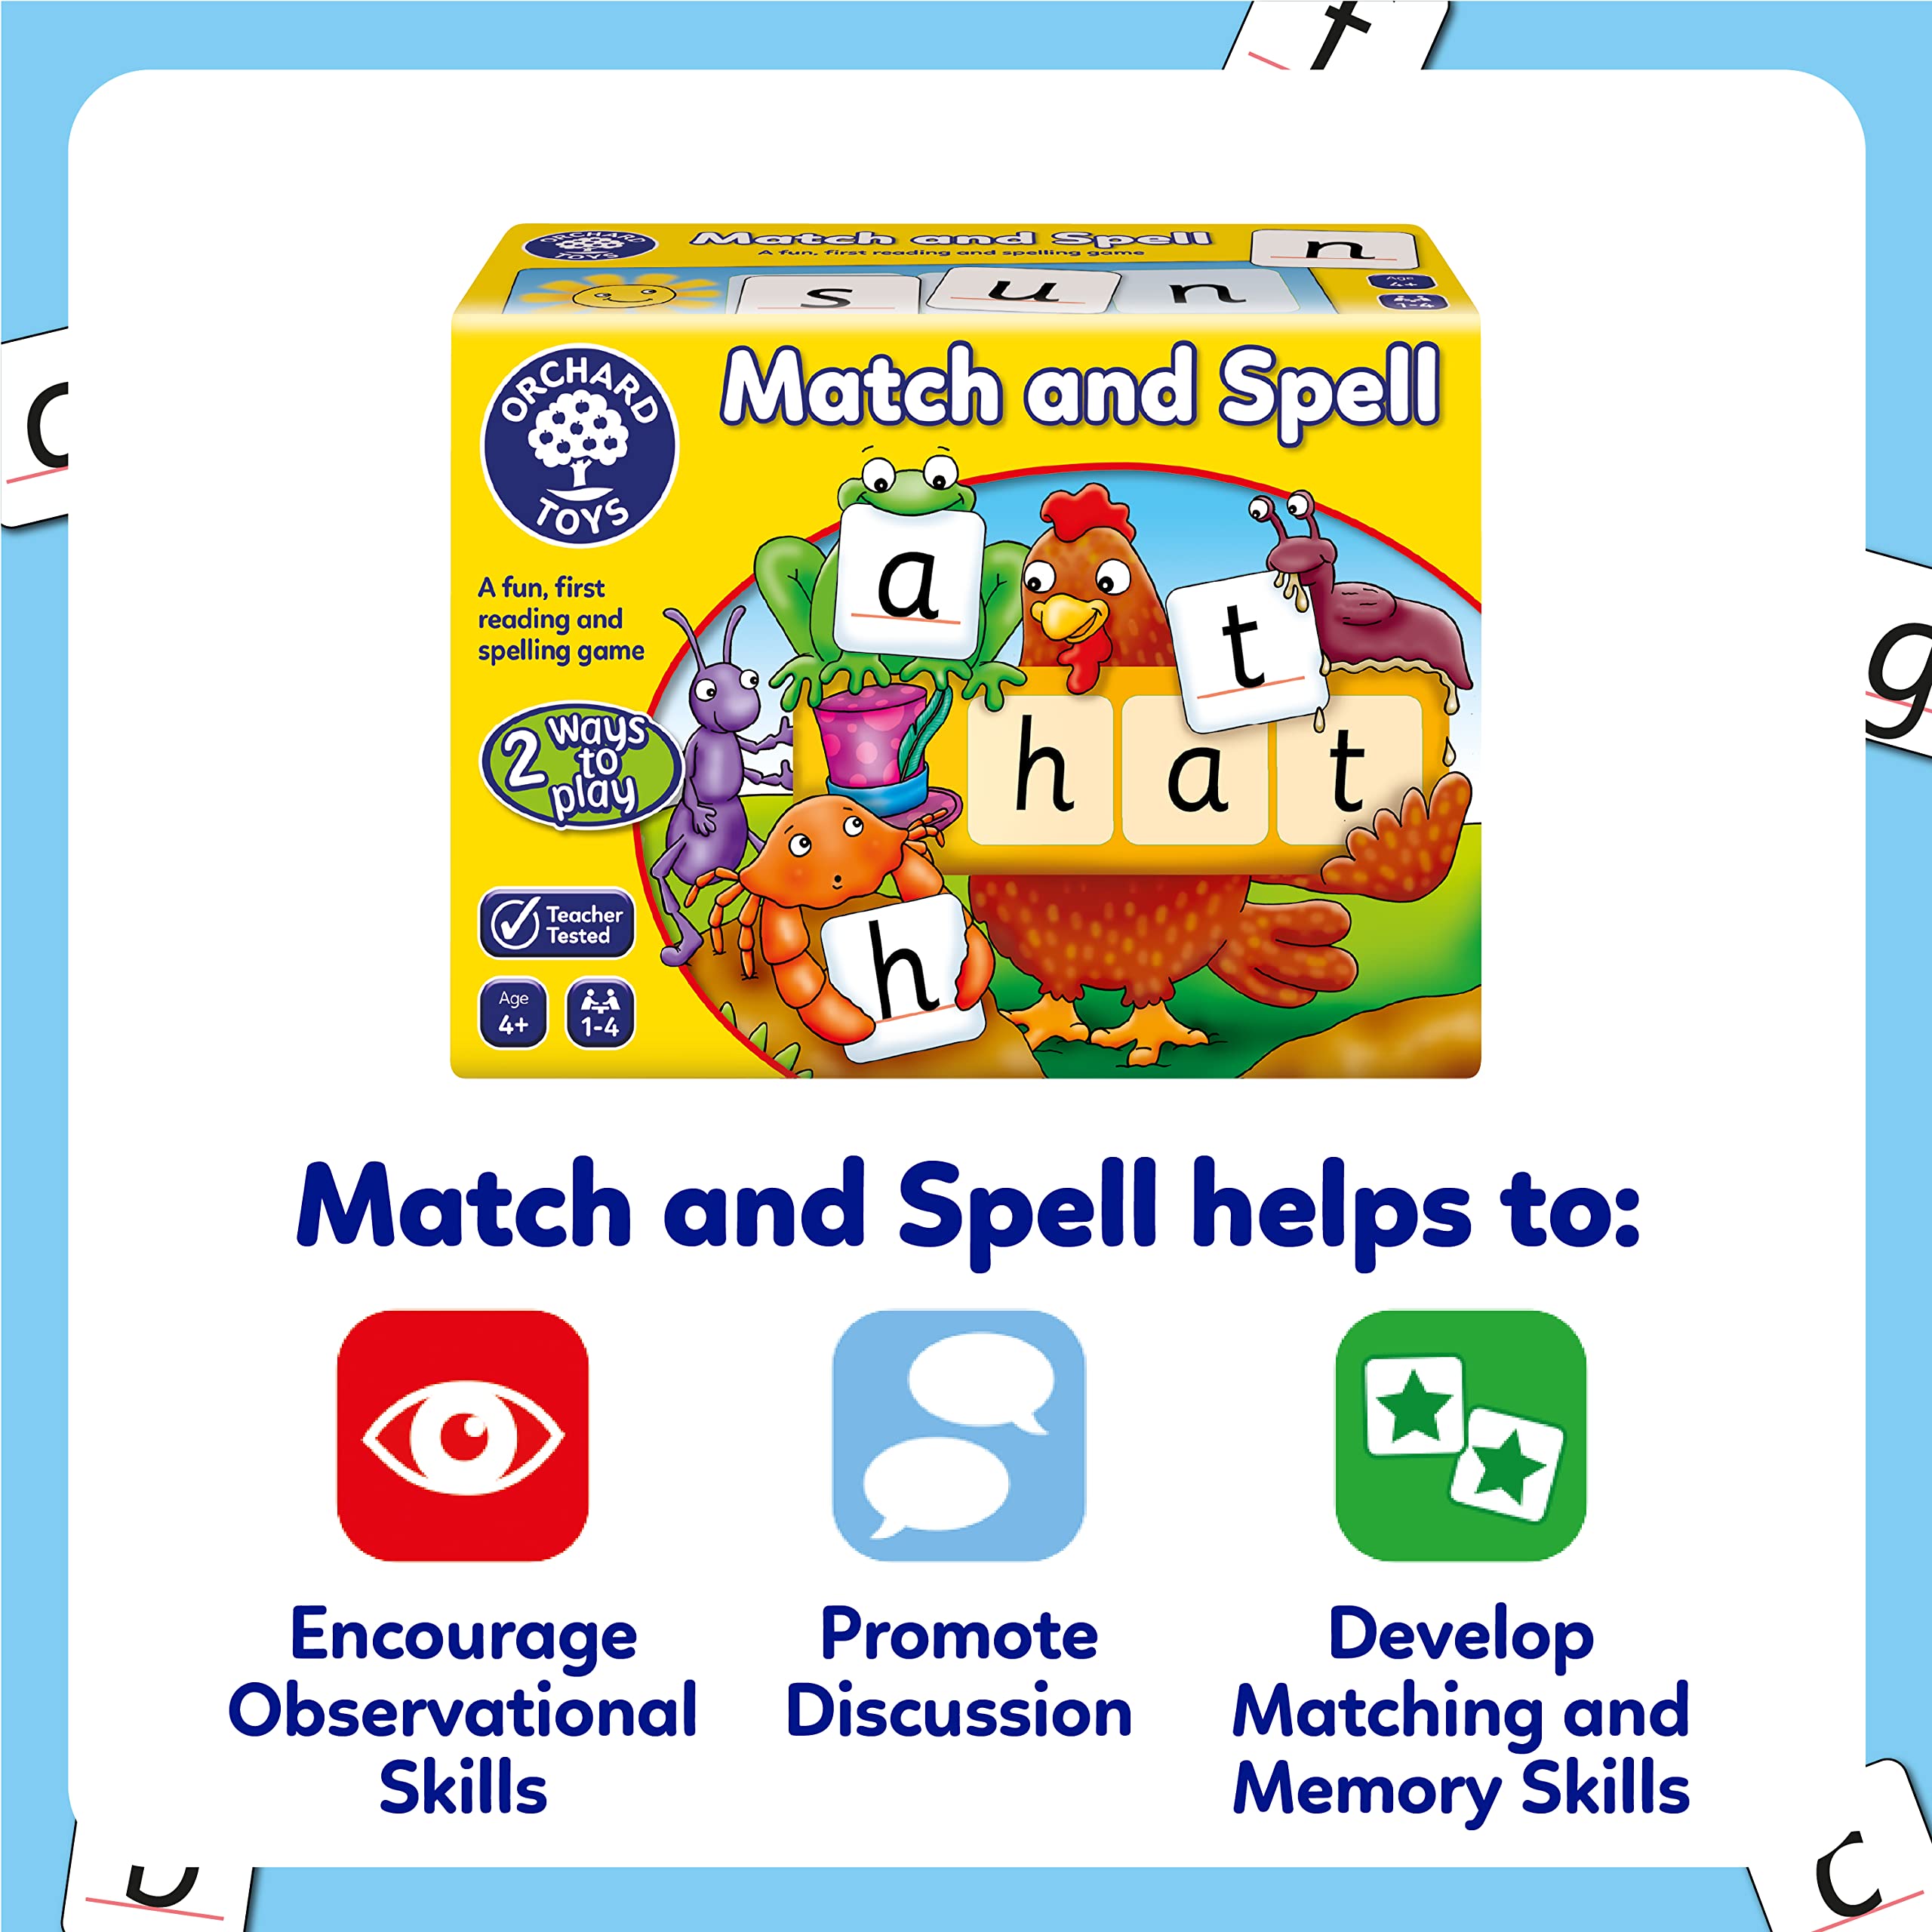 Orchard Toys Match and Spell Game for Sight Words, Reading & Literacy Skills, Educational Board Games for Kids, Spelling Word Games with Flash Cards, Phonics, Alphabet & Learning Toys for Ages 4+